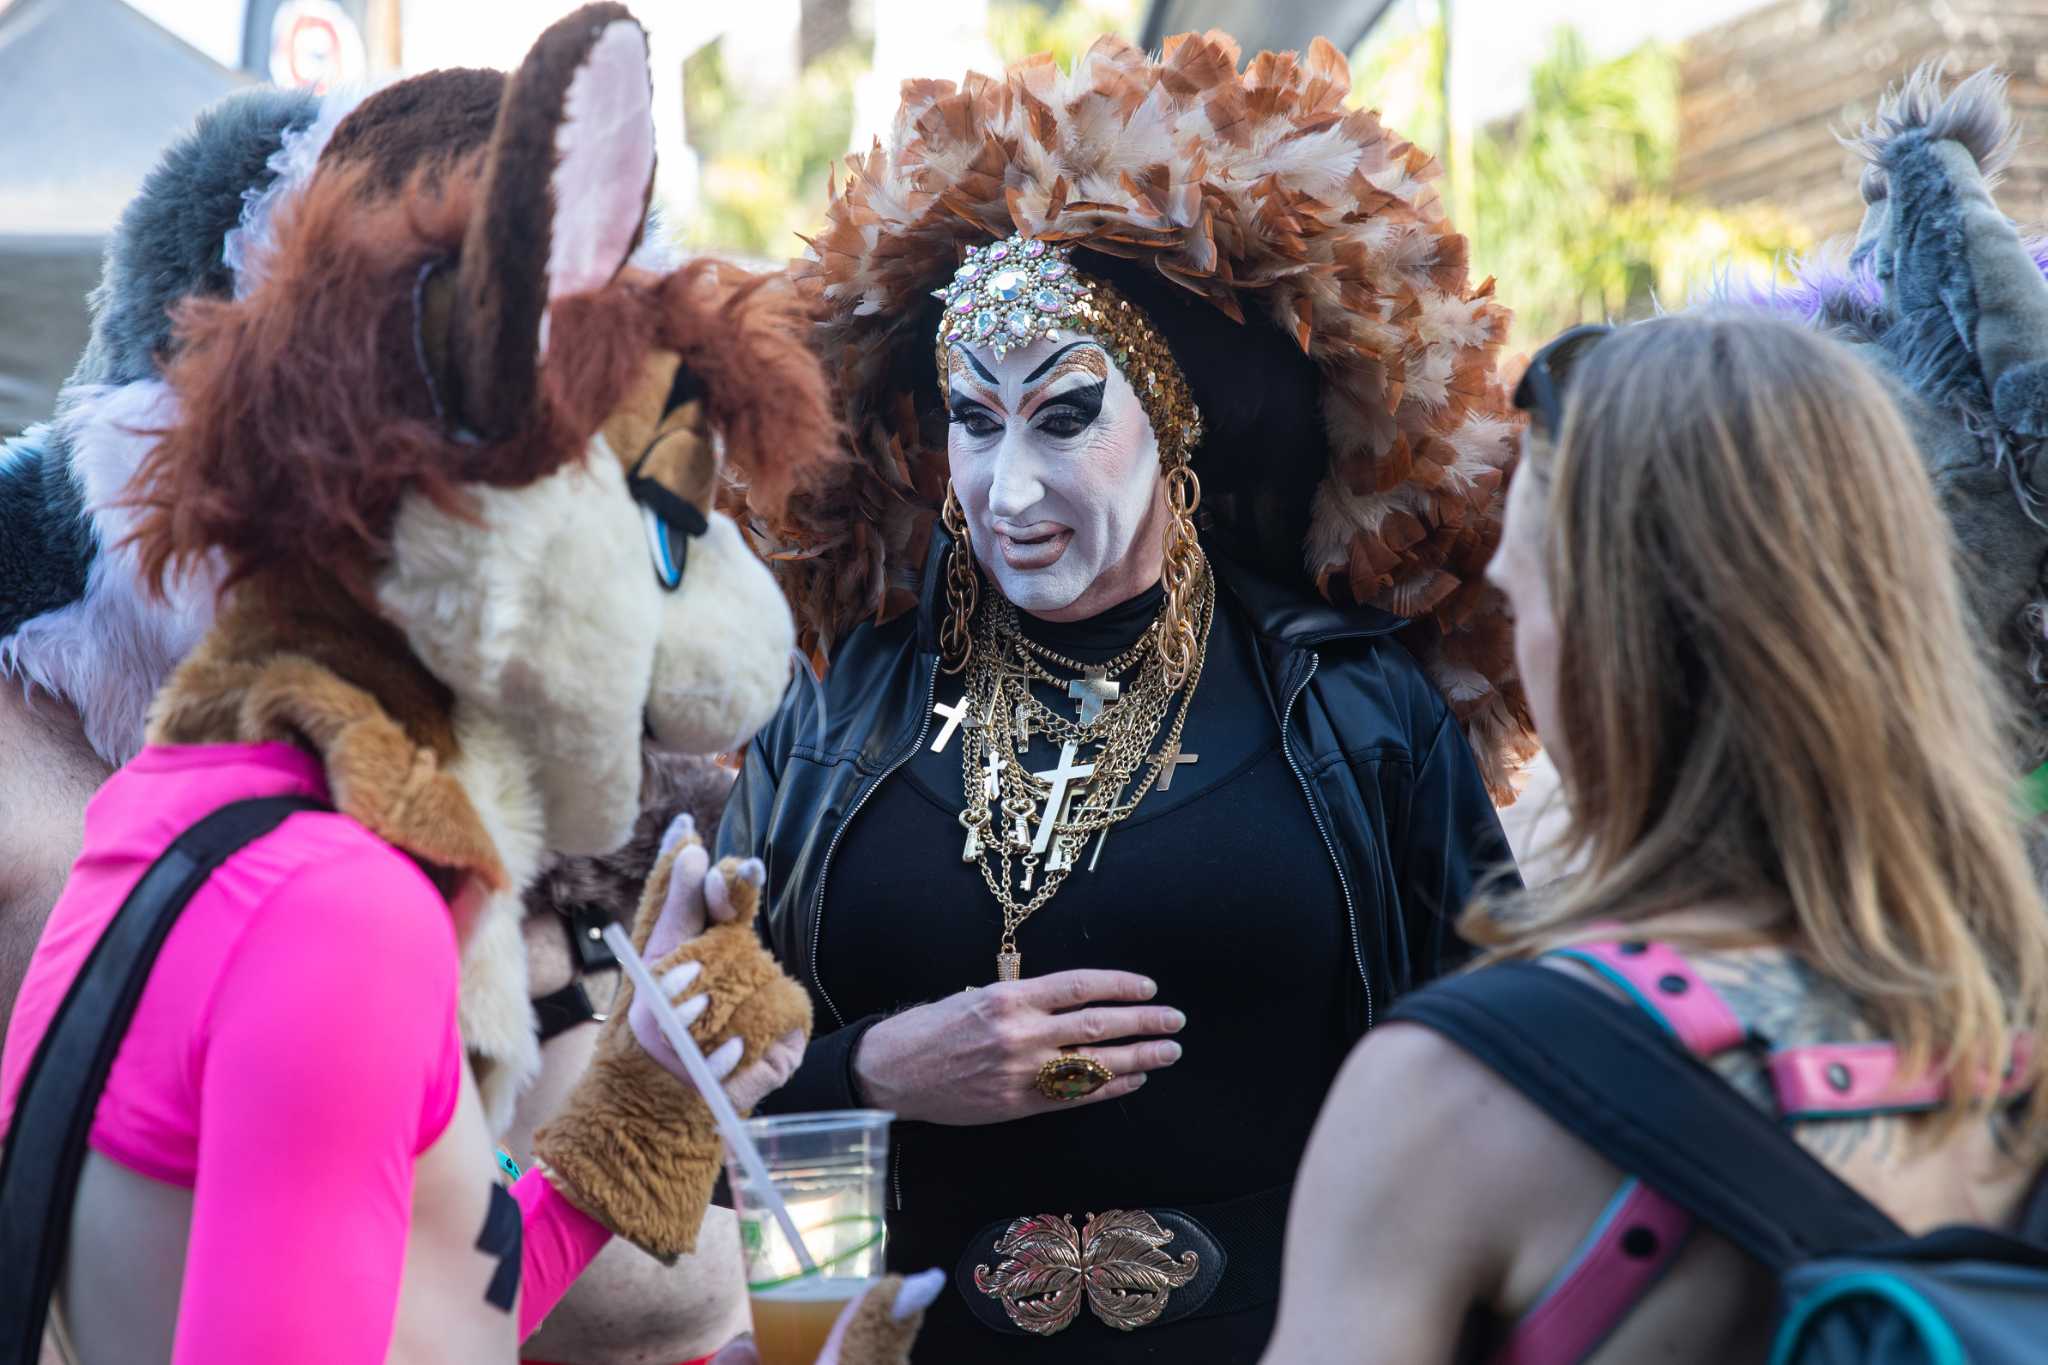 Sisters of Perpetual Indulgence member reacts to latest uproar